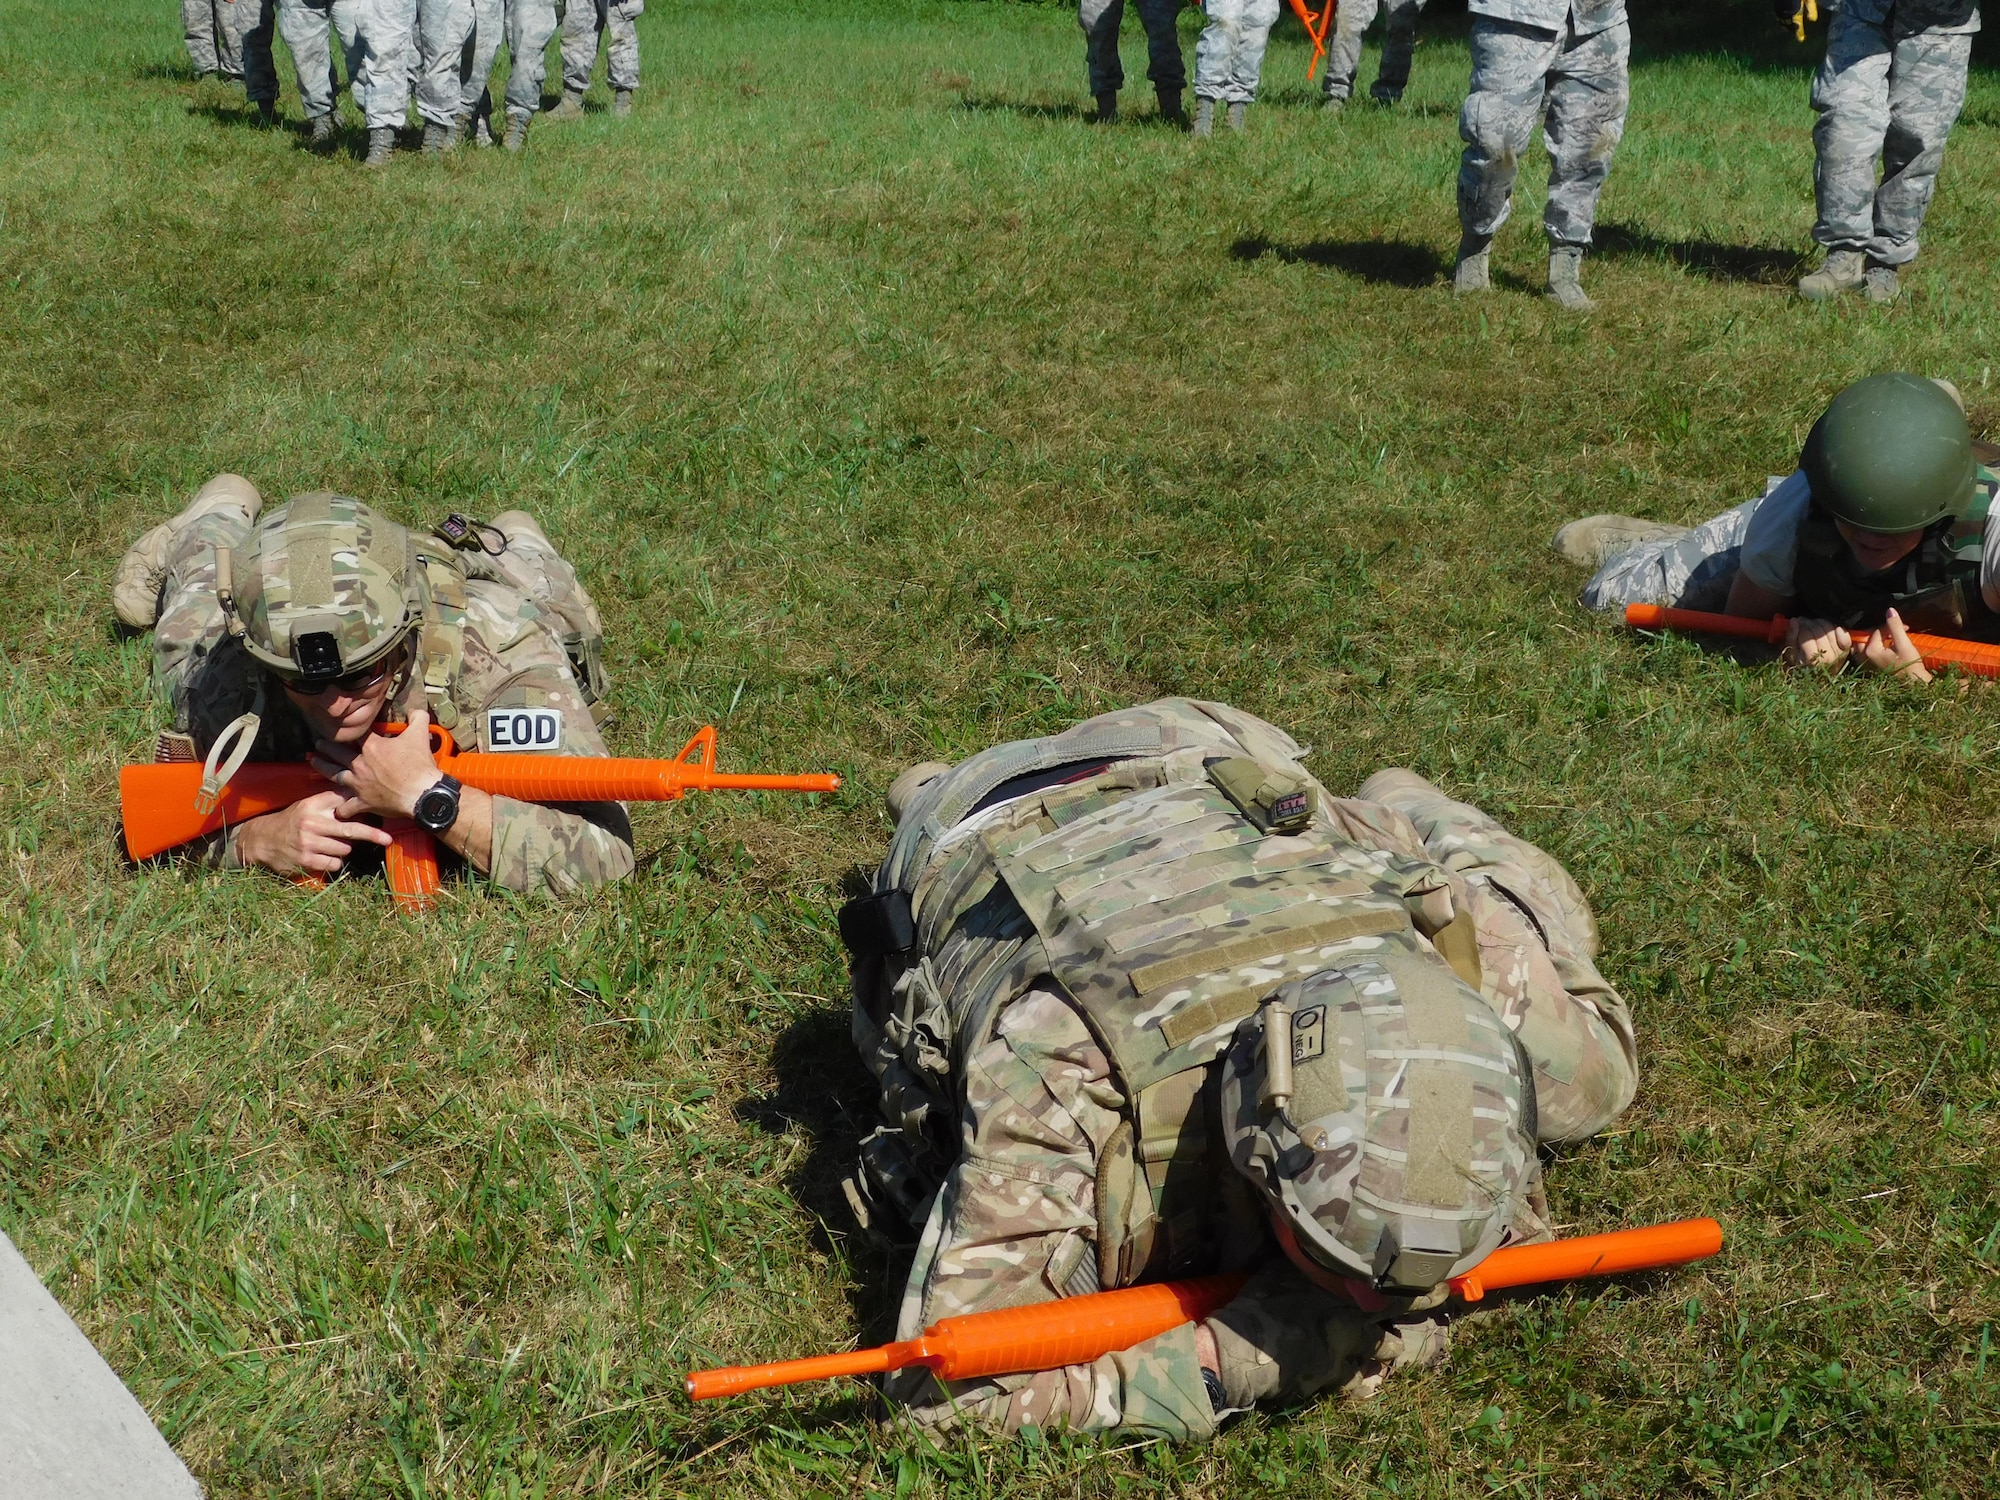 Members of the 436th Civil Engineer Squadron explosive ordnance disposal flight practice individual movement techniques during a field training exercise Sept. 20, 2017, at Fort Indiantown Gap, Pa. More than 80 members of the 436th CES attended the hands-on training event. (Courtesy Photo)